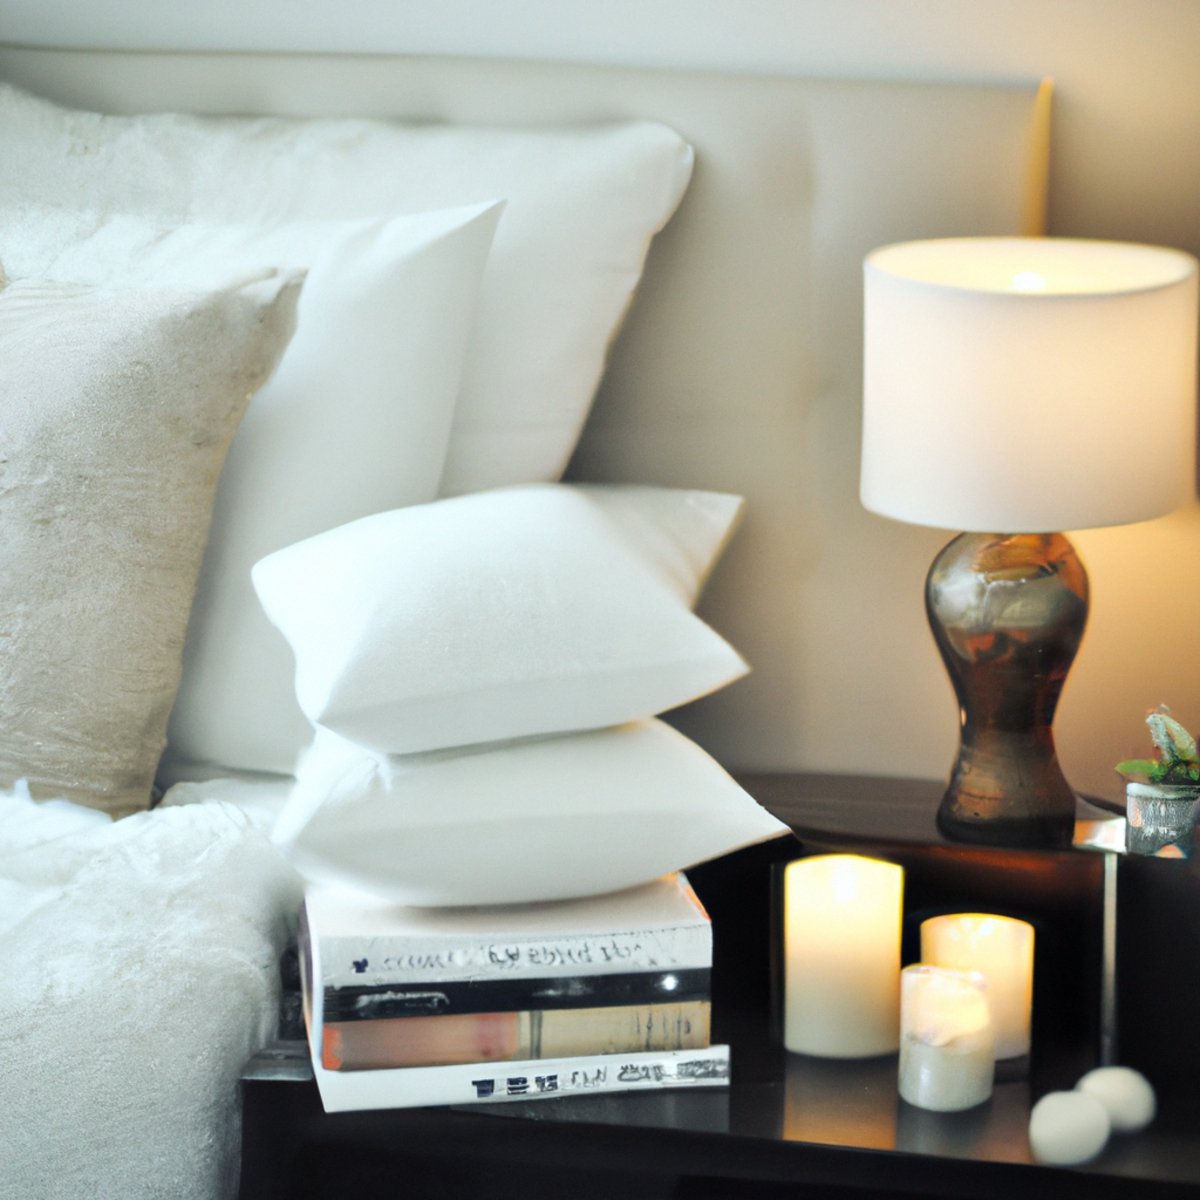 Beautifully arranged bedside table promotes relaxation and restful sleep with pillow, books, flowers, diffuser, tea, and serene ambiance -Self-care at Home